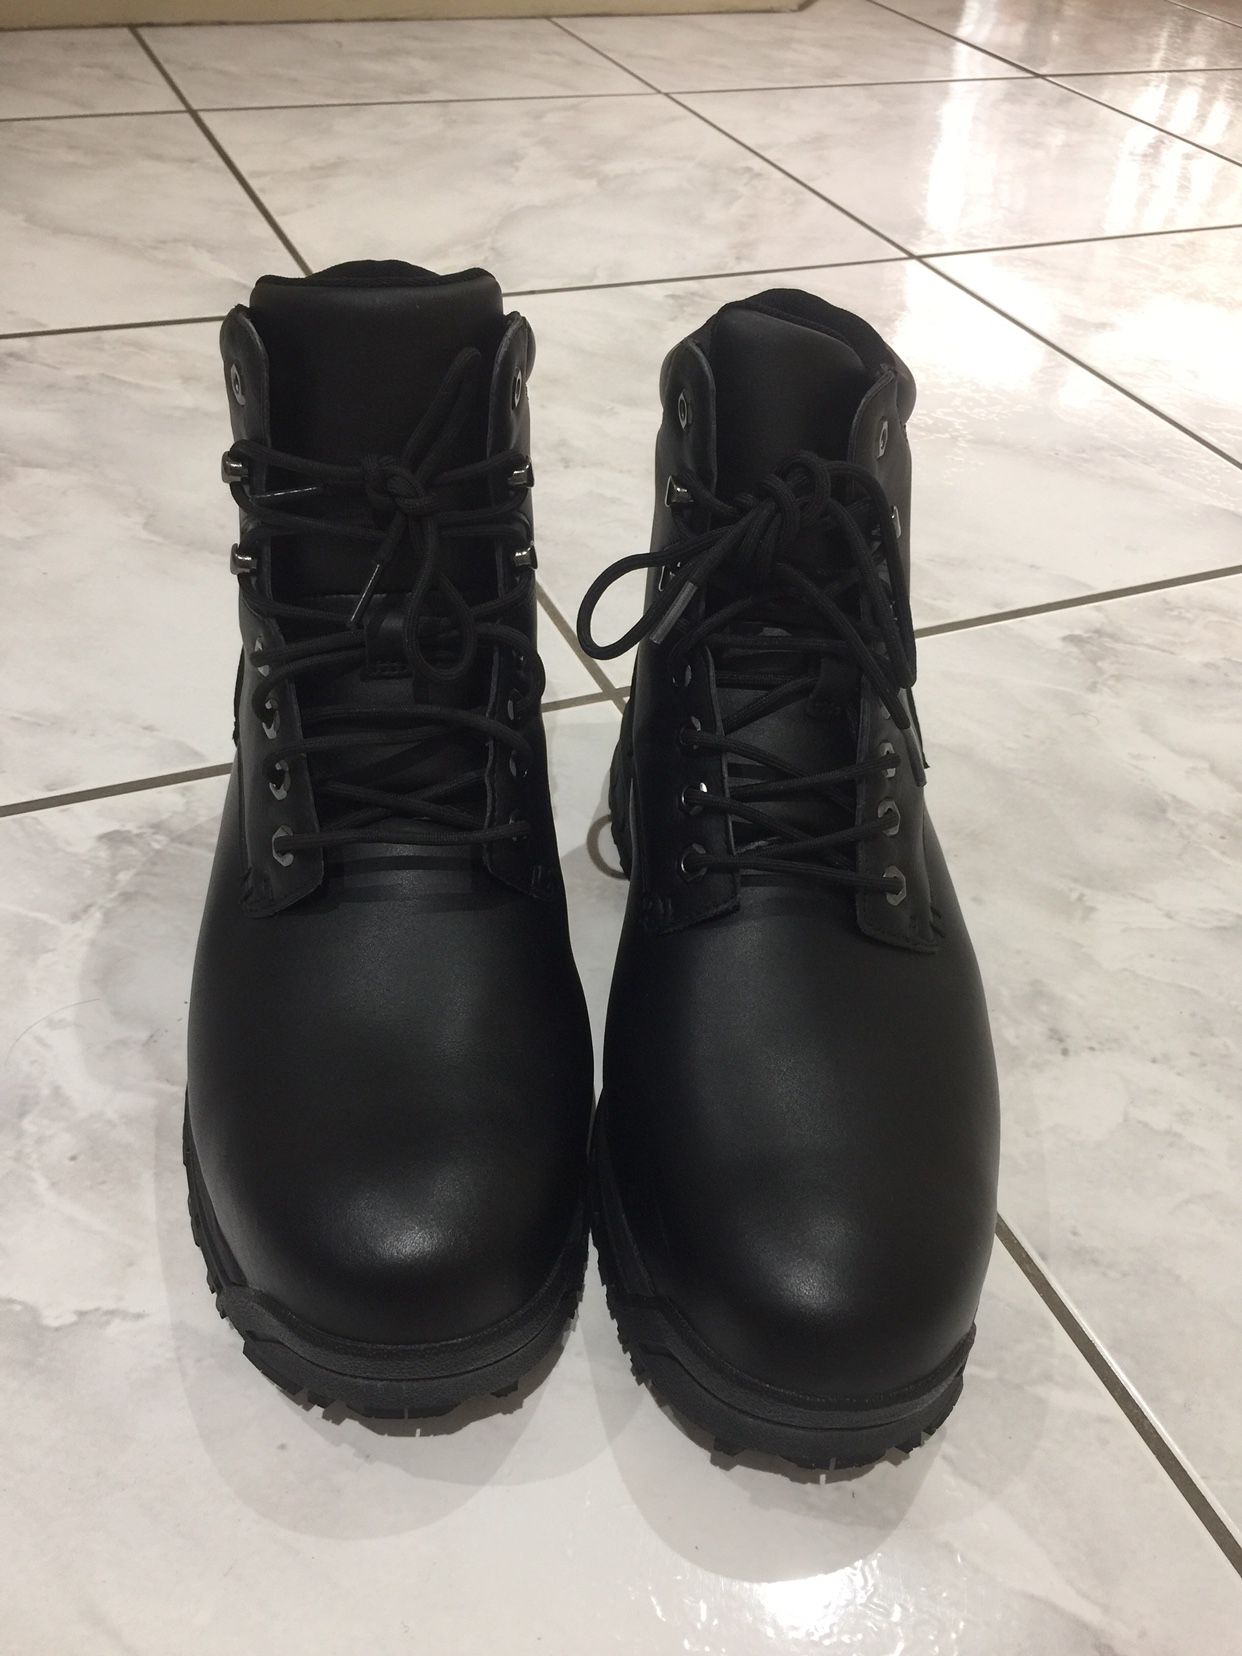 Ace Slip & Oil Resistant Work Boots